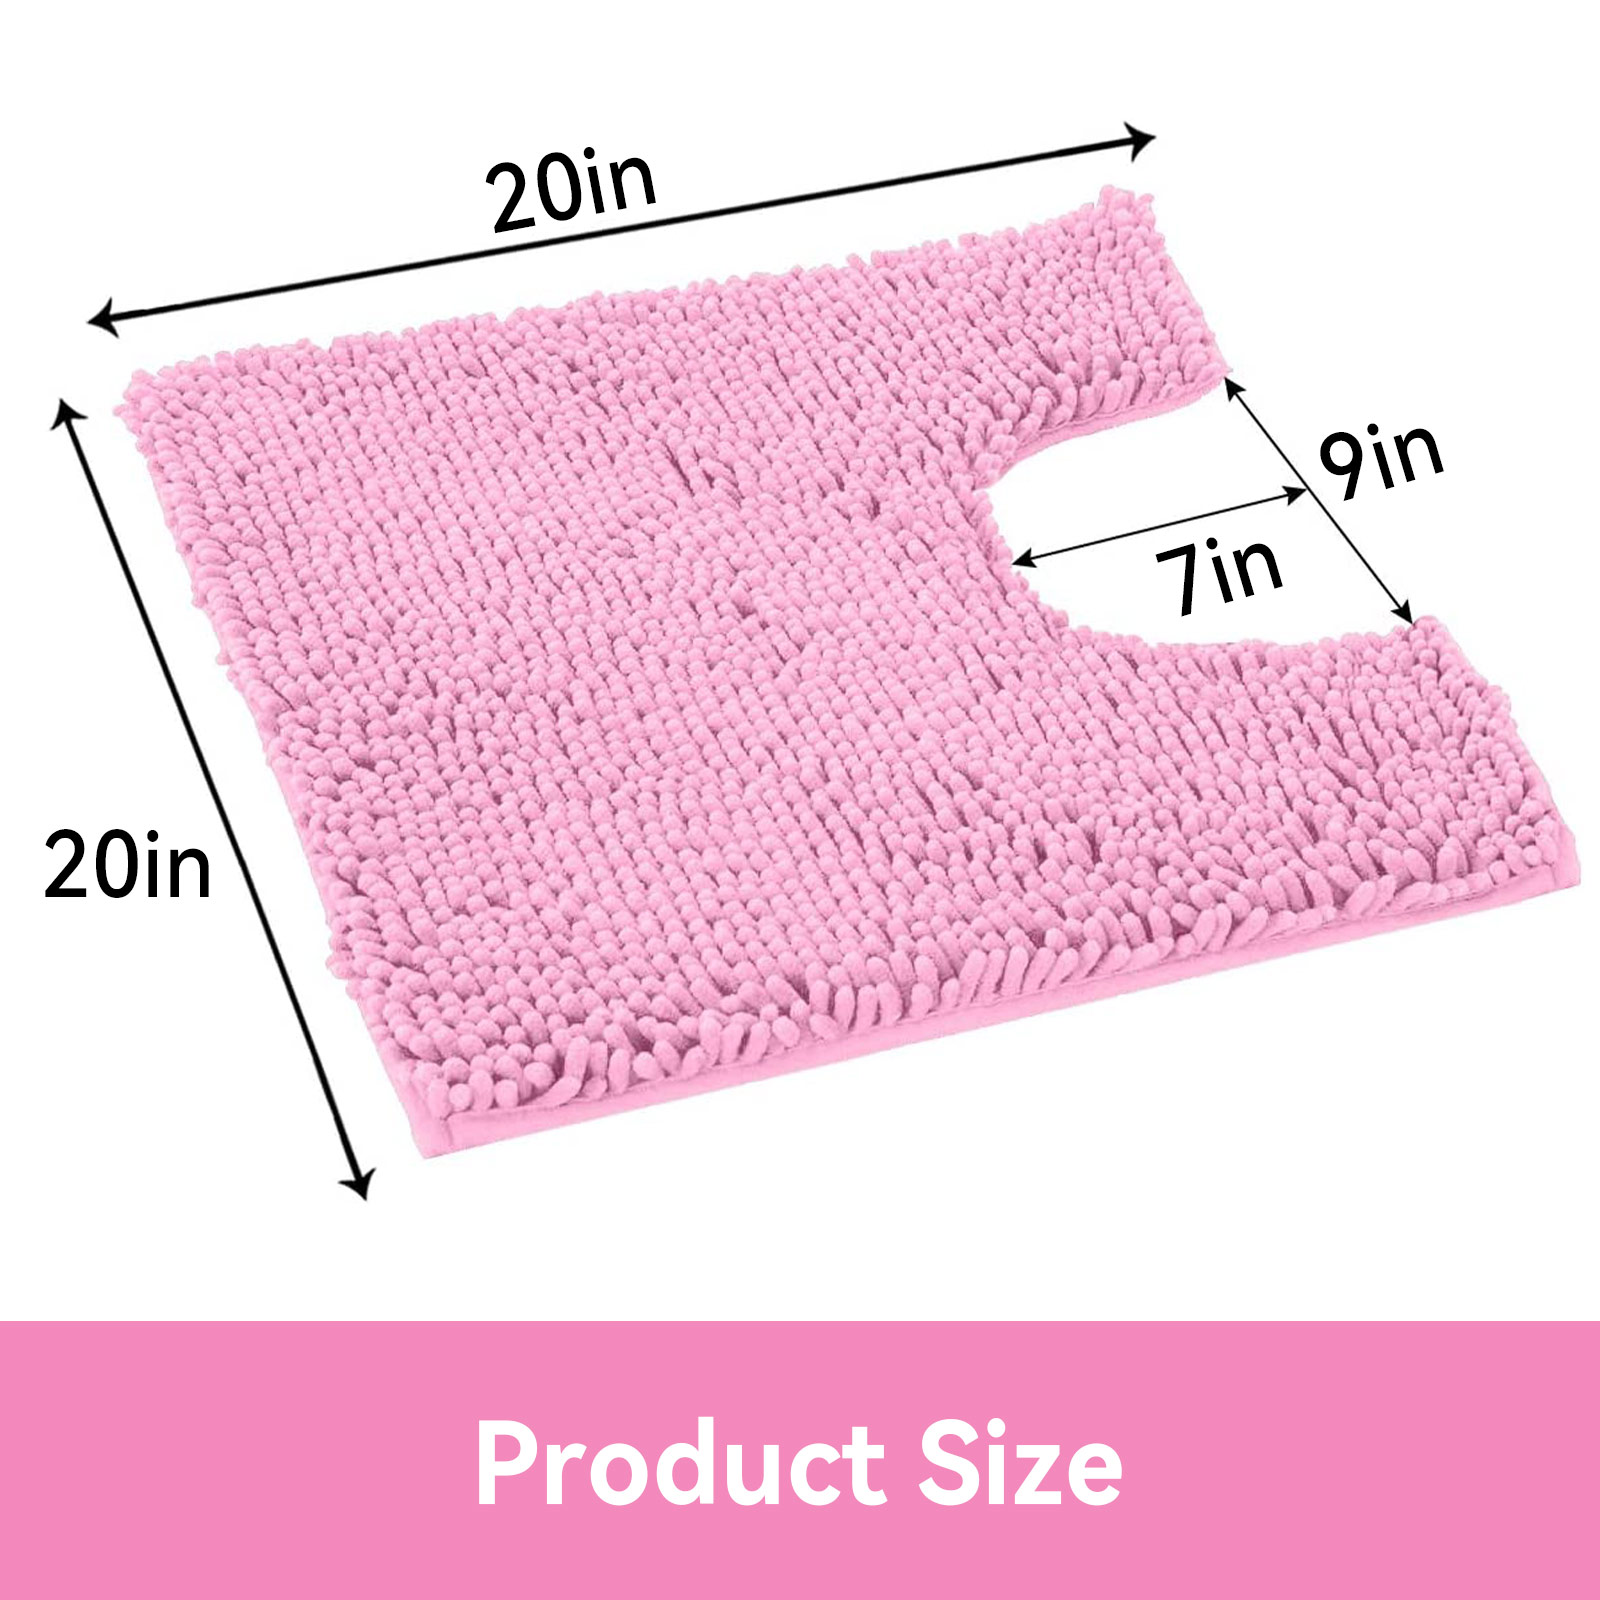 Tripumer Bath Rugs U-Shaped Toilet Mats Ultra Soft Non Slip and Absorbent Chenille Contour Bath Rug 20x20 inch Bathroom Rugs Pink Plush Bath Mats Machine Wash and Dry - image 2 of 6